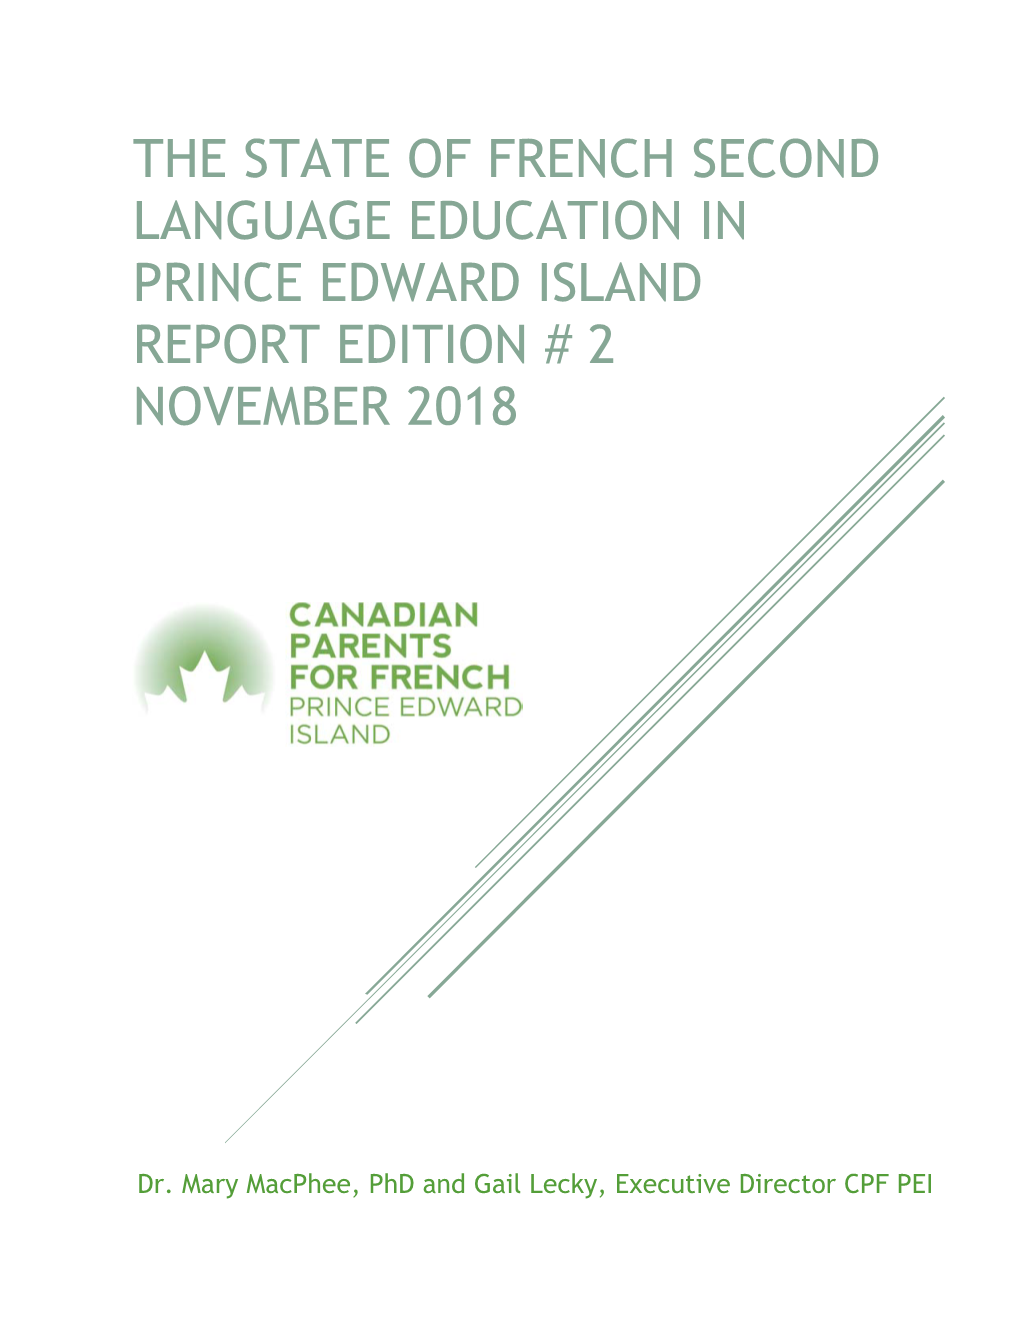 The State of French Second Language Education In